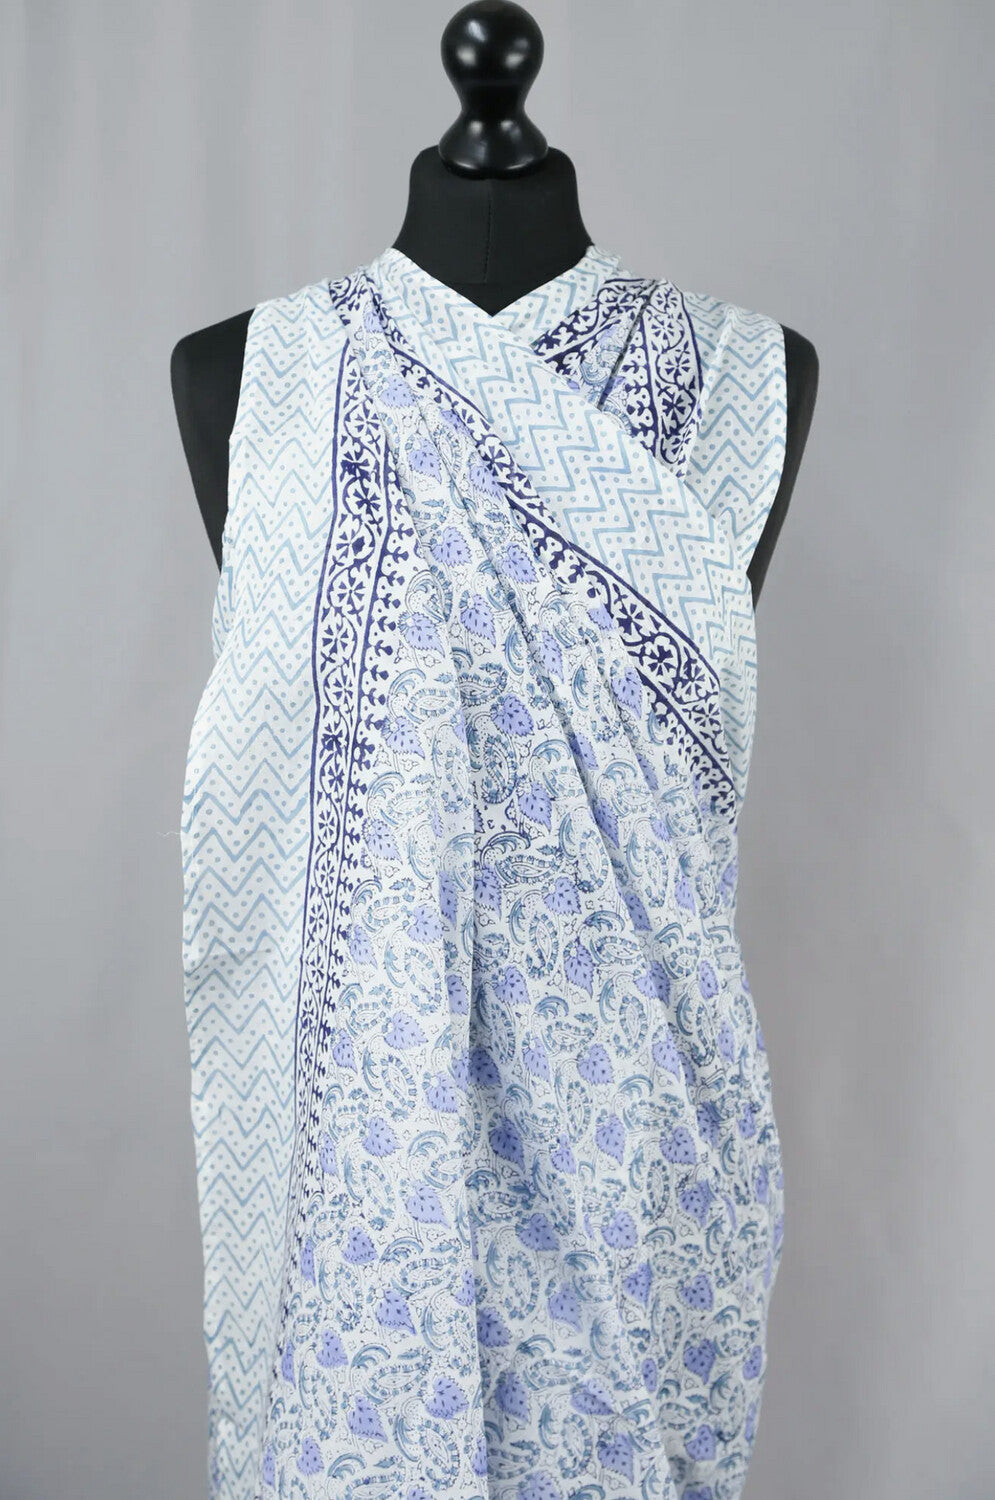 Sarong style fabric shawl/beach cover